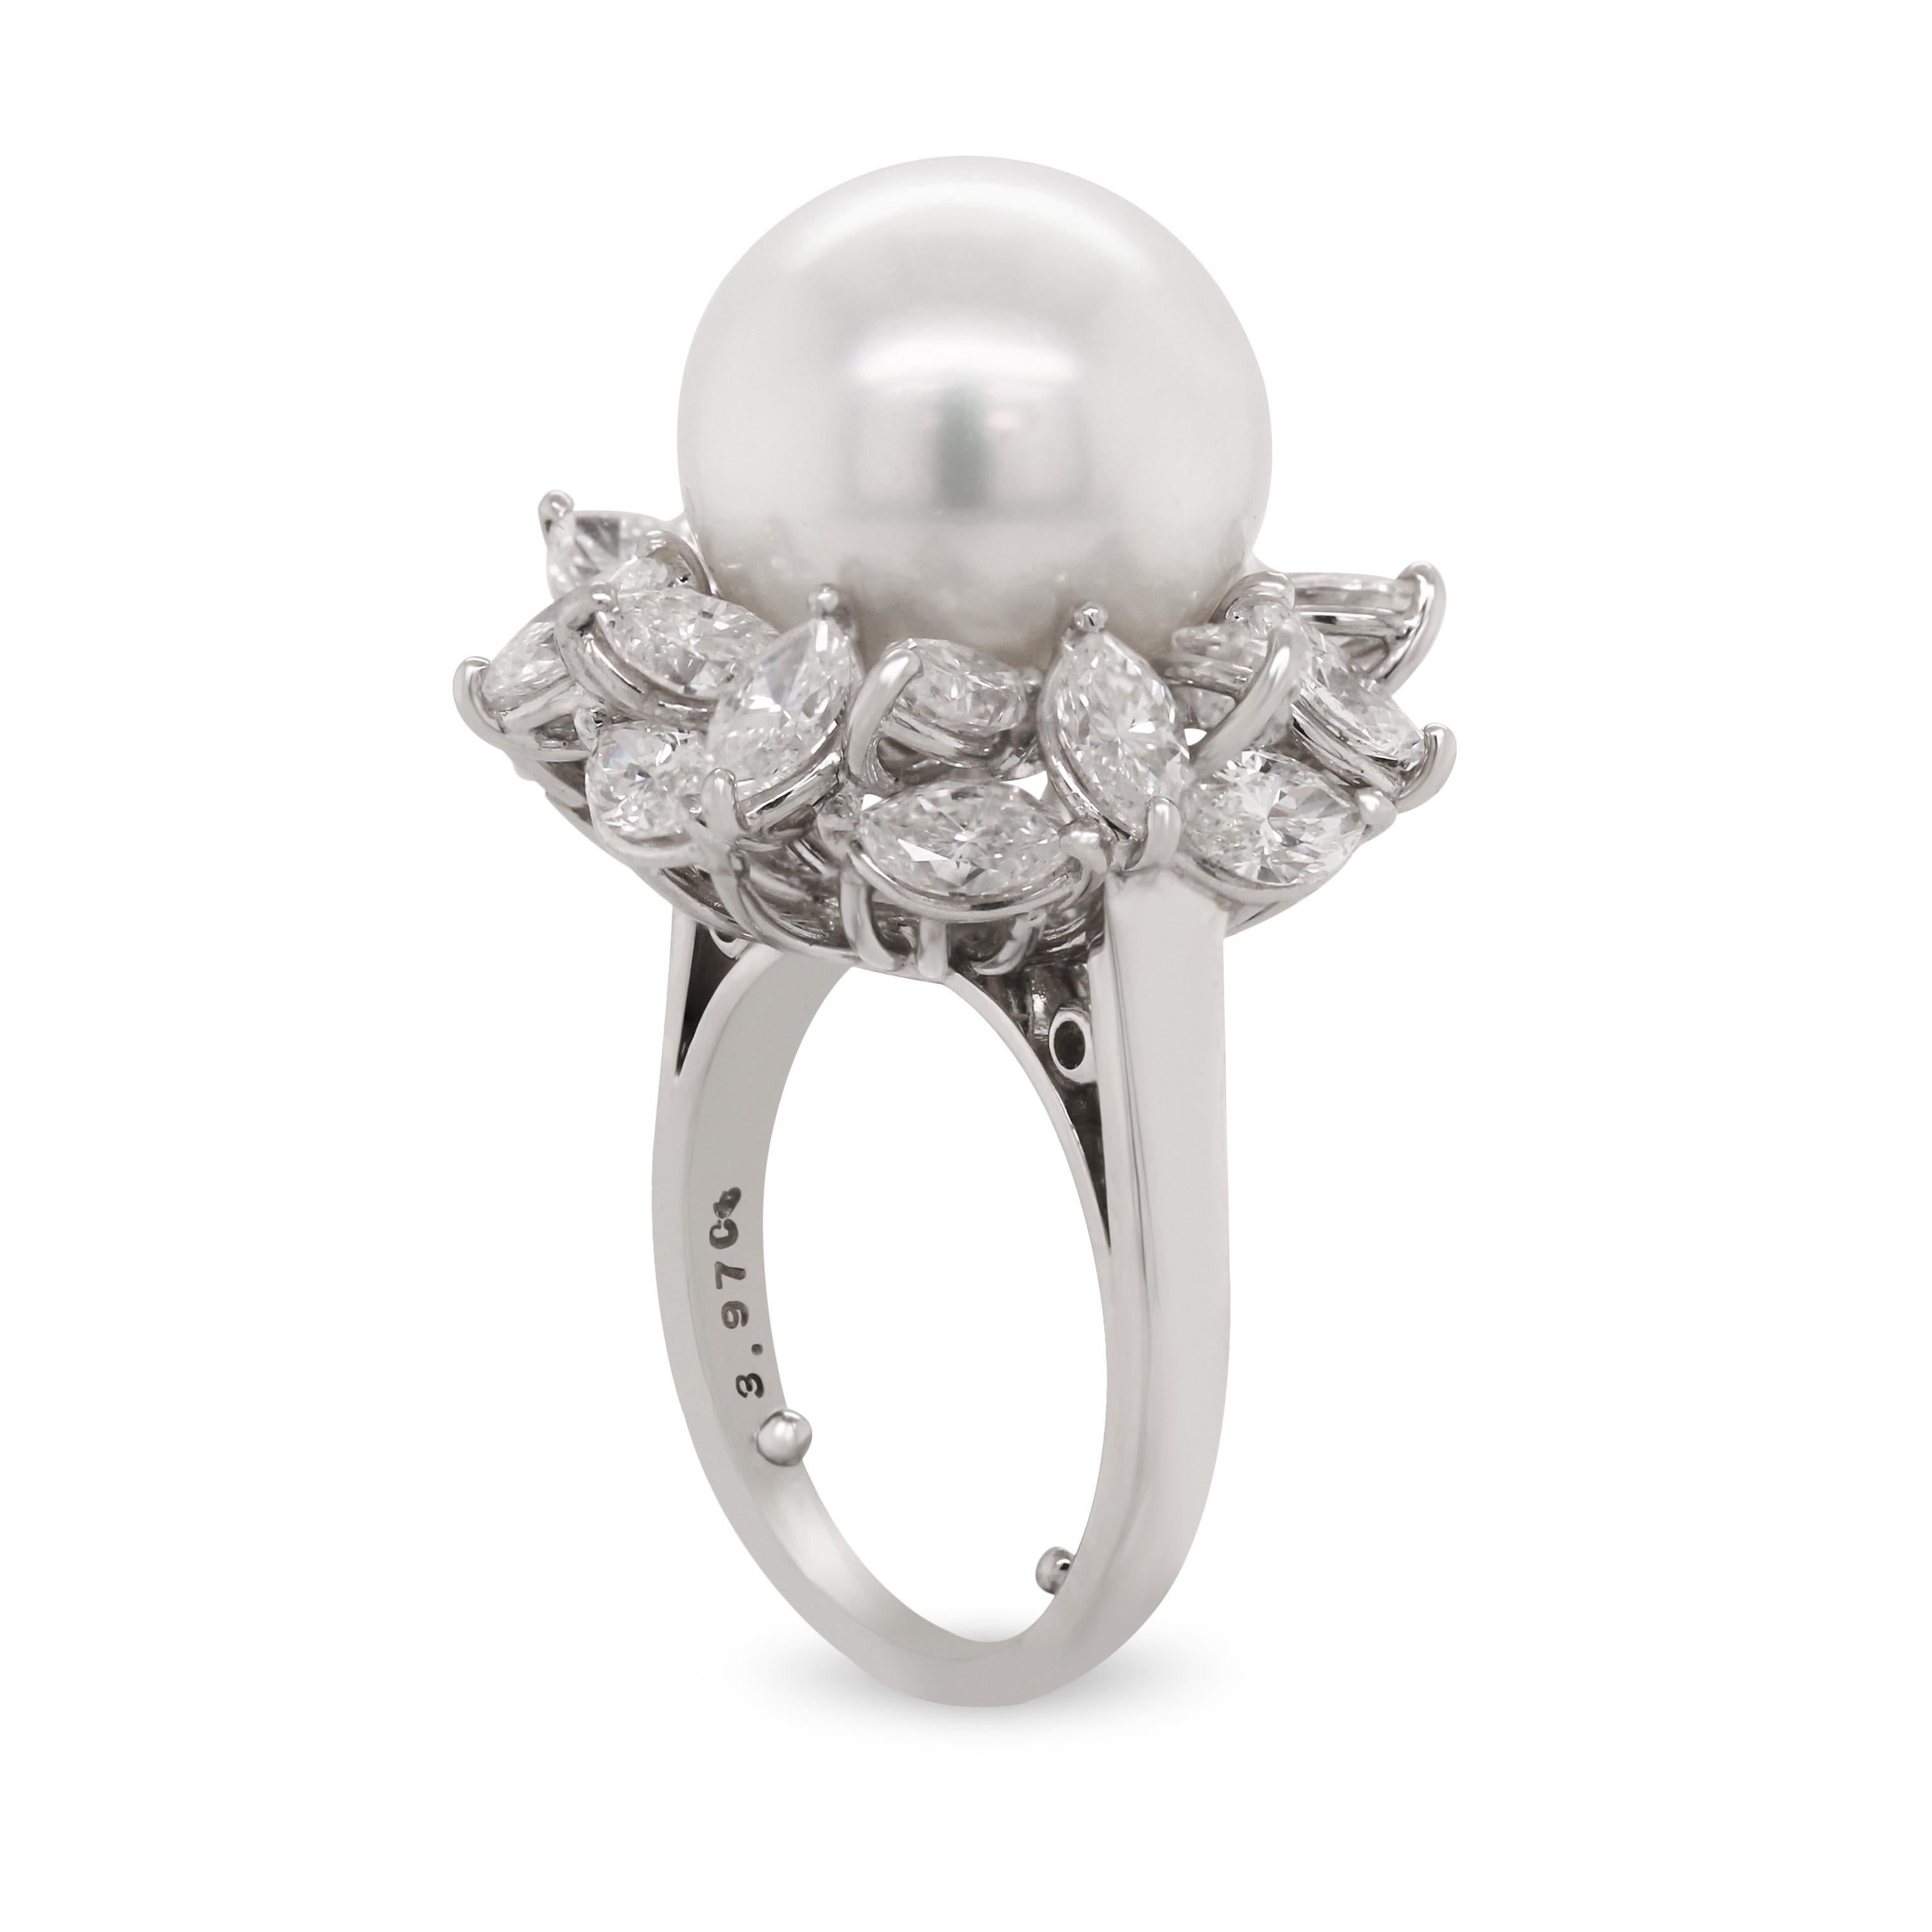 Mikimoto South Sea Pearl Marquise Diamond 18 Karat White Gold Cocktail Ring

This state-of-the-art ring by Mikimoto features a 13.5mm South Sea Pearl center surrounded with marquise diamonds.

3.97 carat F-G color, VVS1-VS1 clarity diamonds

Ring